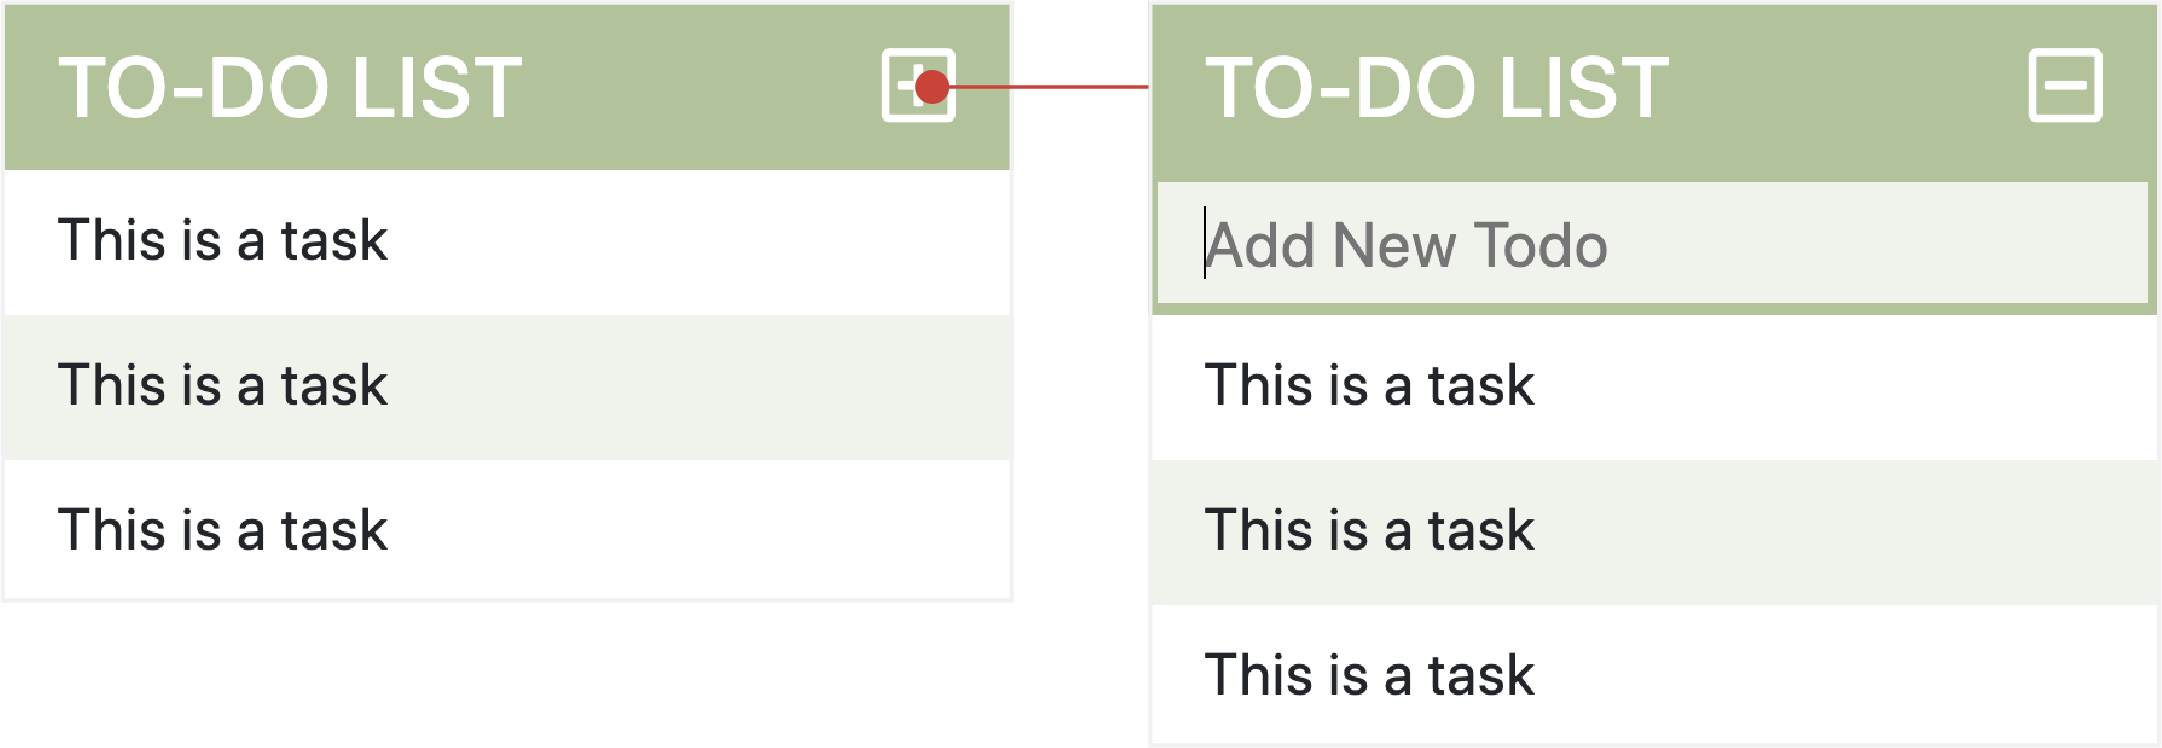 the process of adding new to-do